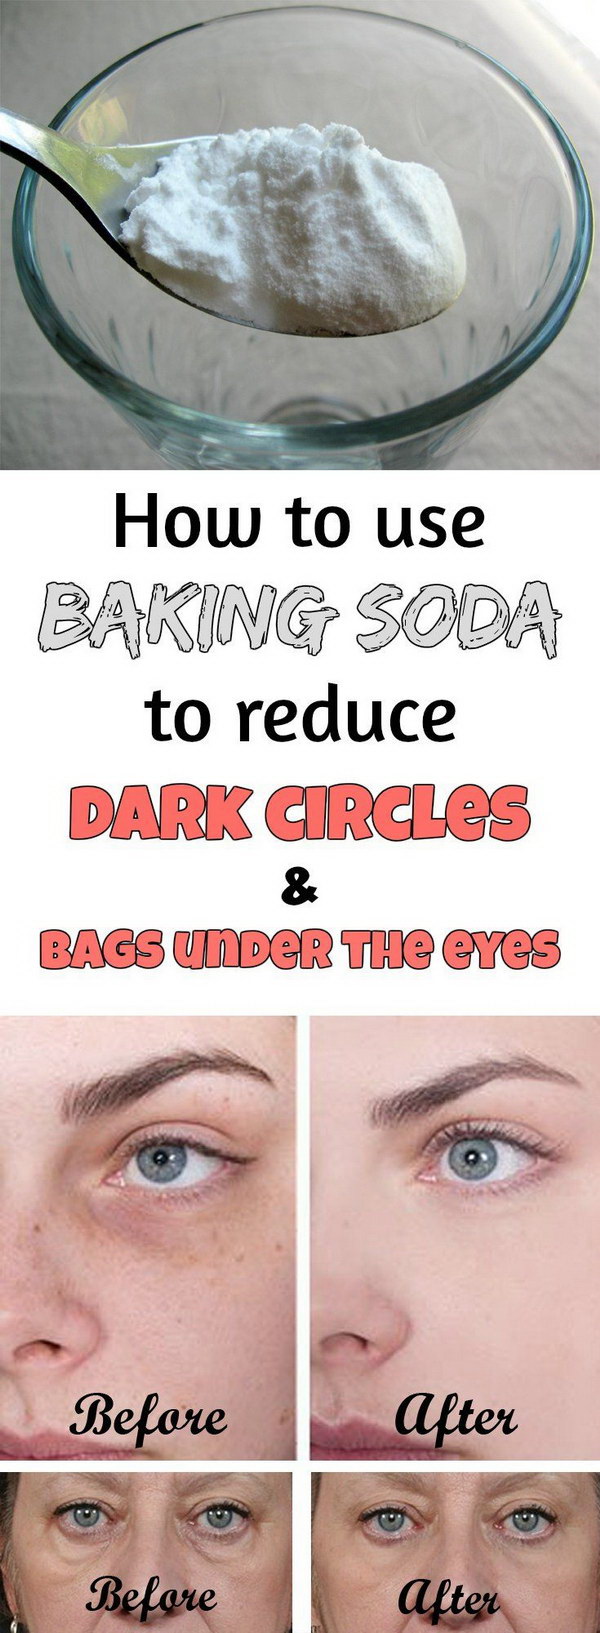 Reduce Dark Circles And Bags Under The Eyes with Baking Soda. 